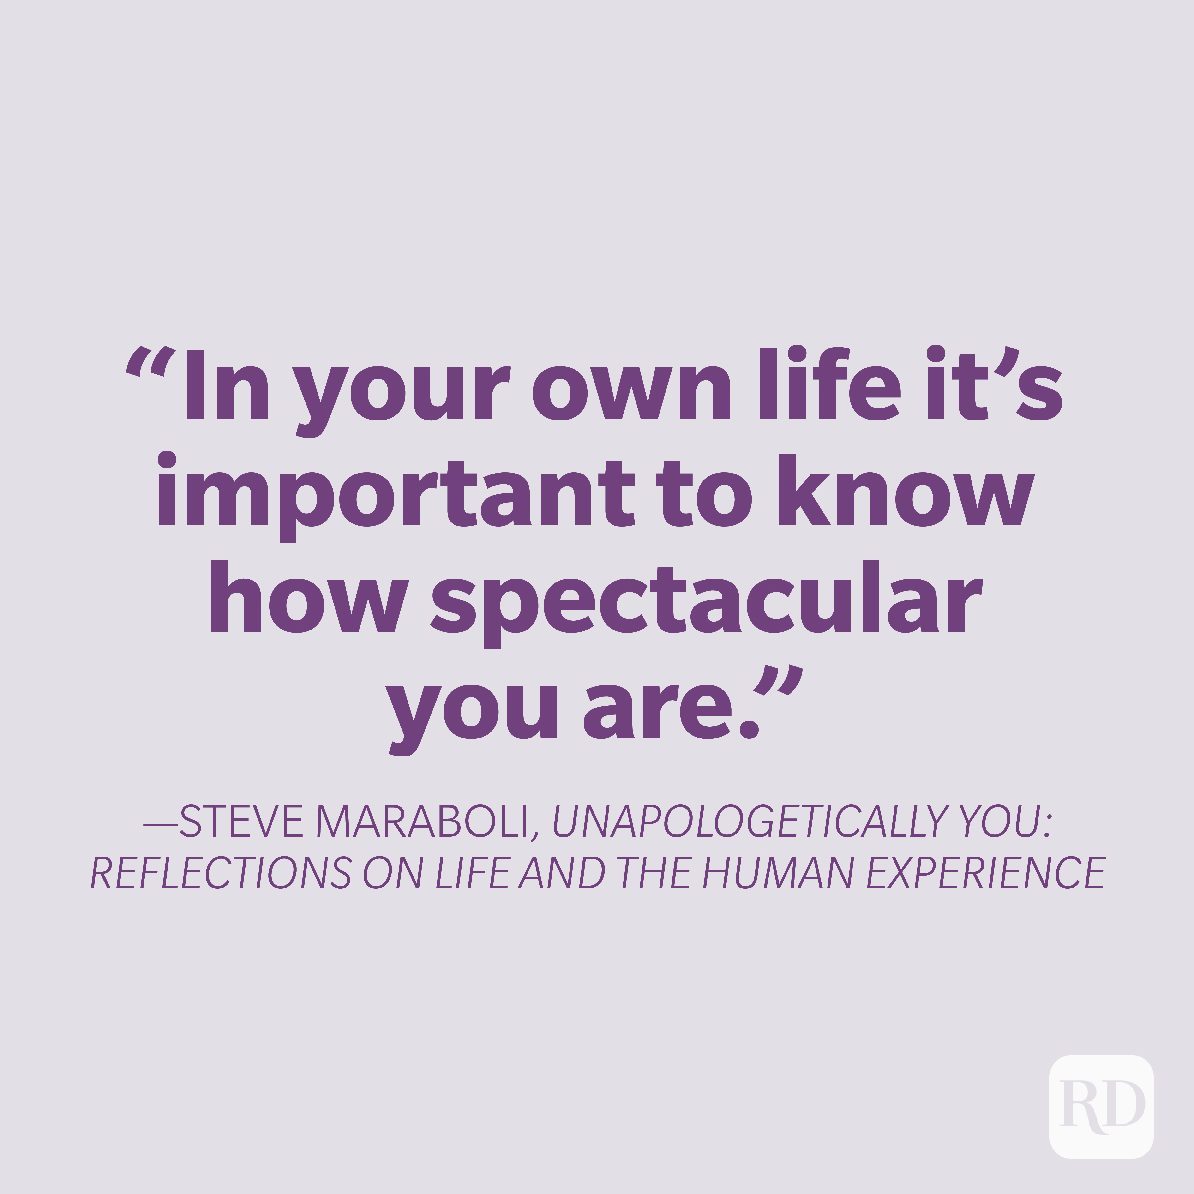 11-In your own life it's important to know how spectacular you are